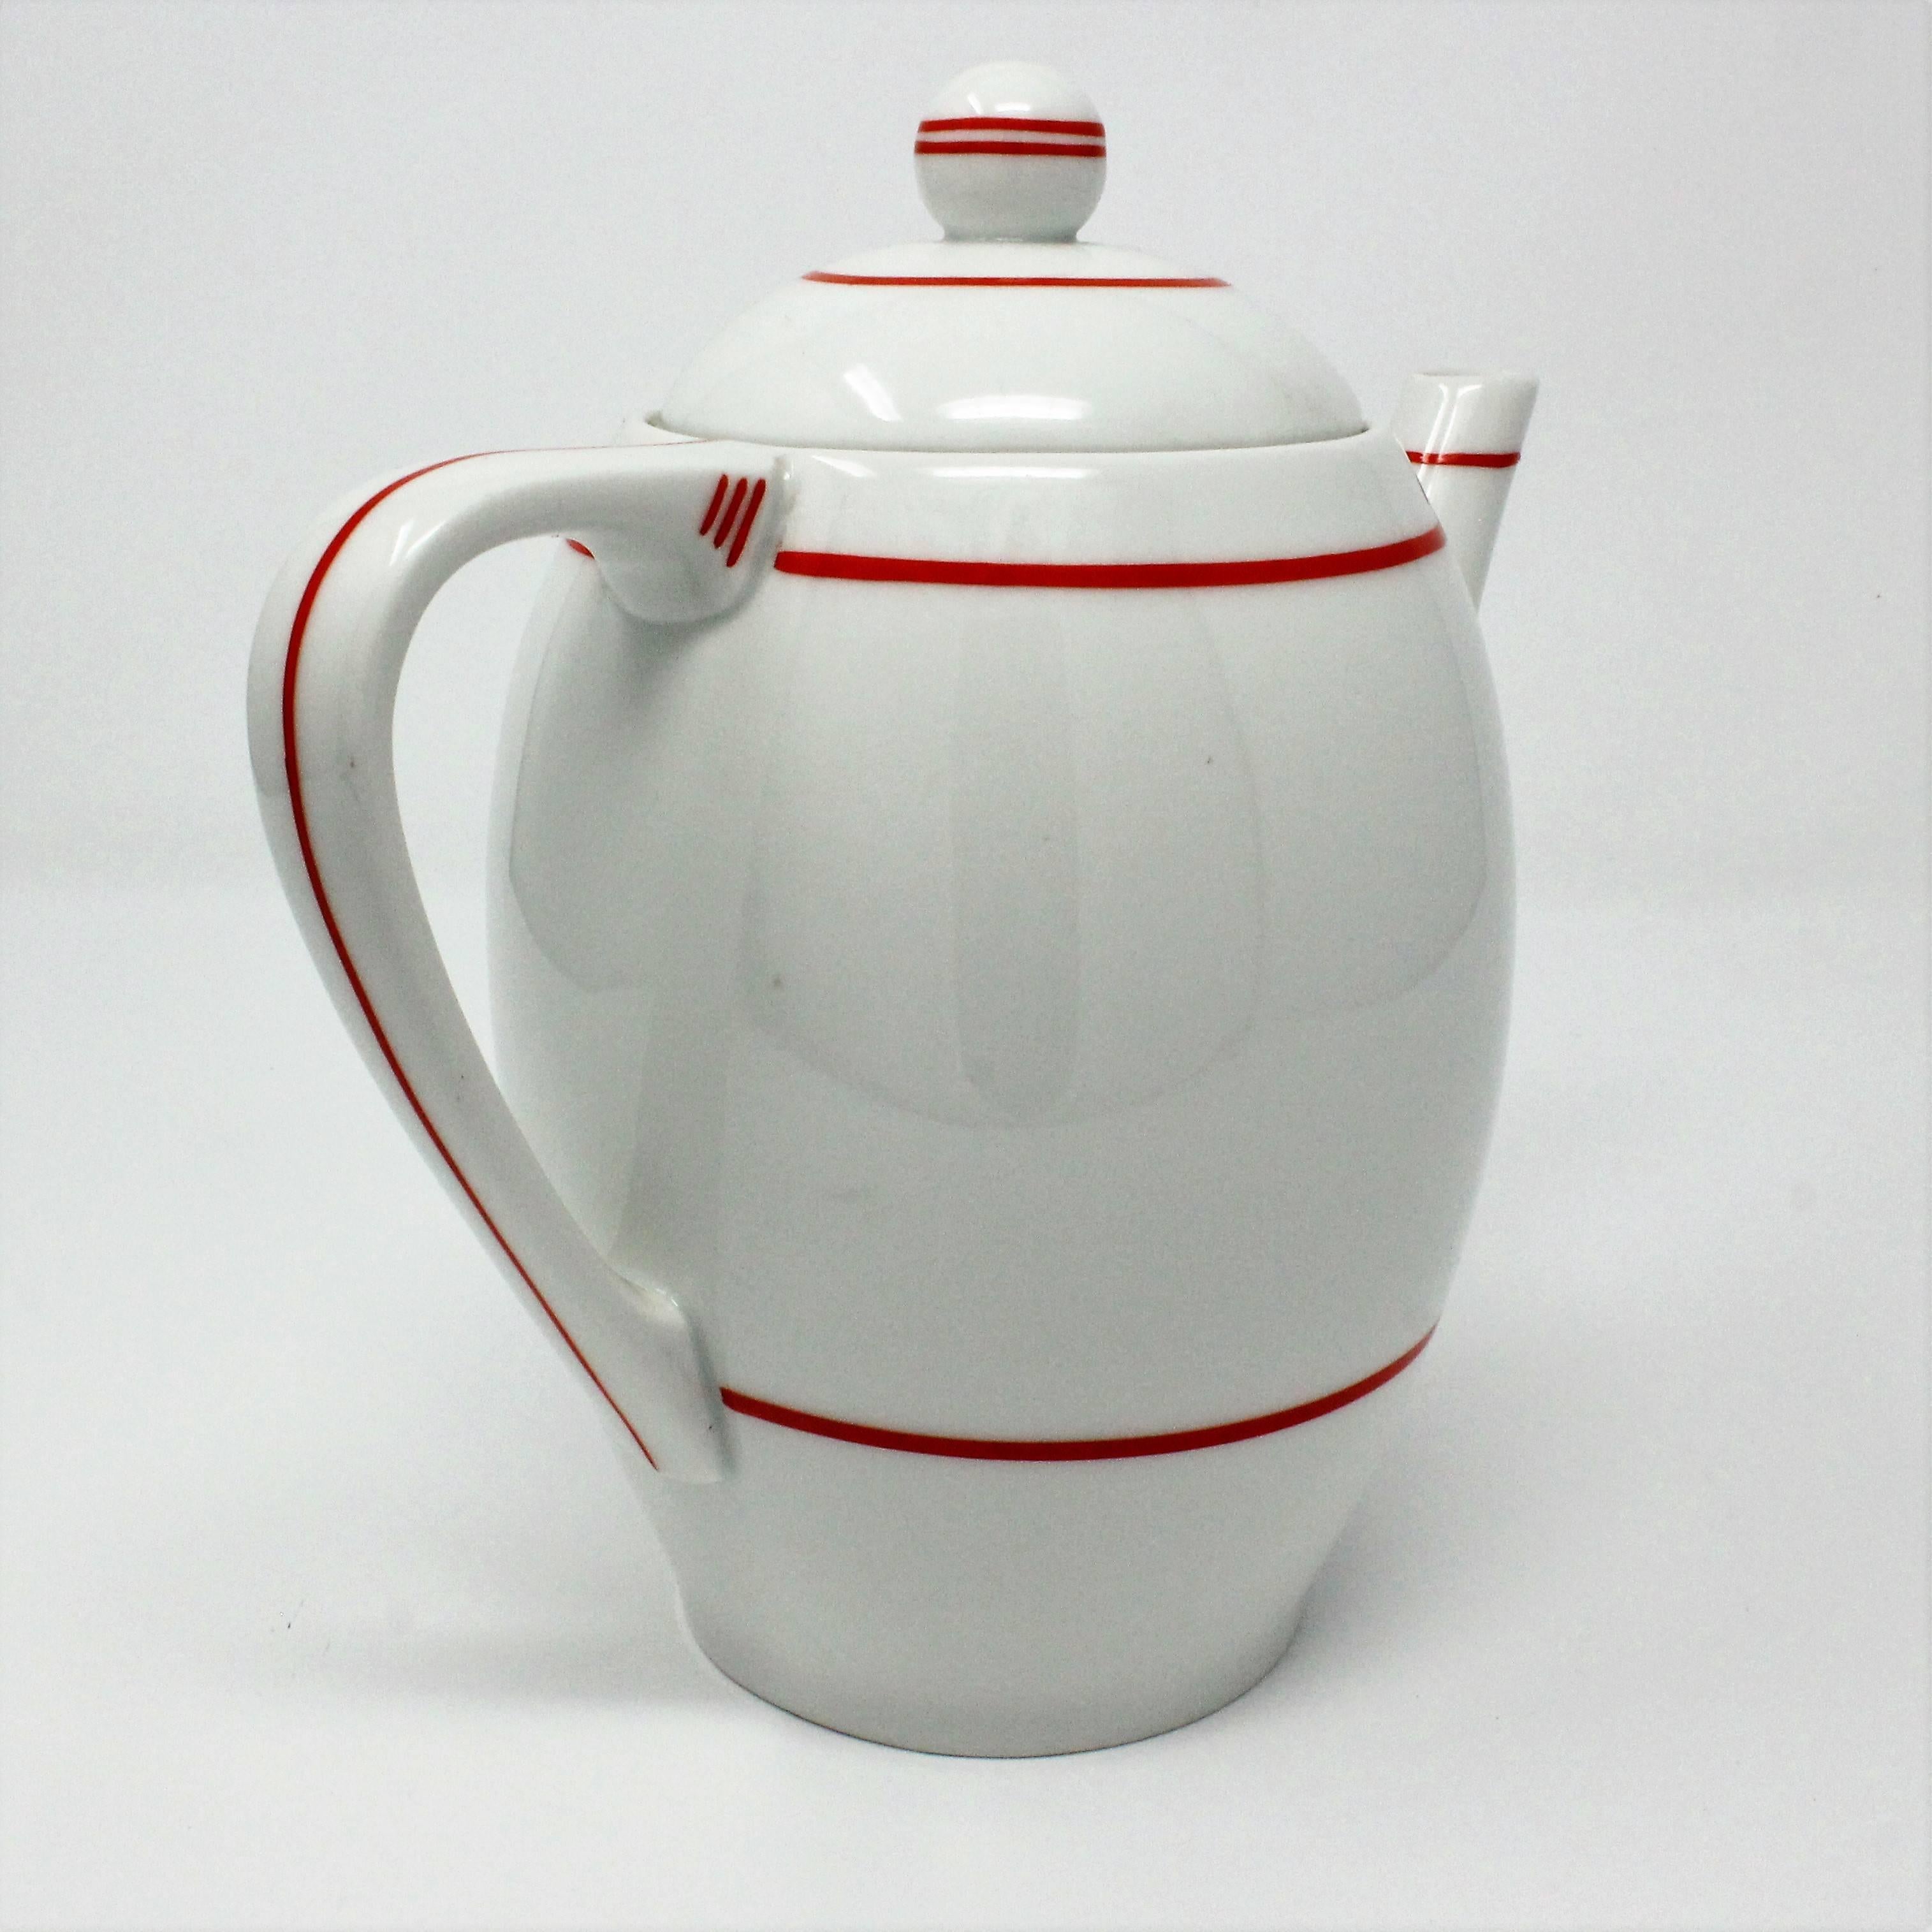 1930s Czechoslovakian Art Deco porcelain teapot by Haas & Czjzek of Chodau. The teapot features a red stripe detail and is in near-perfect condition.